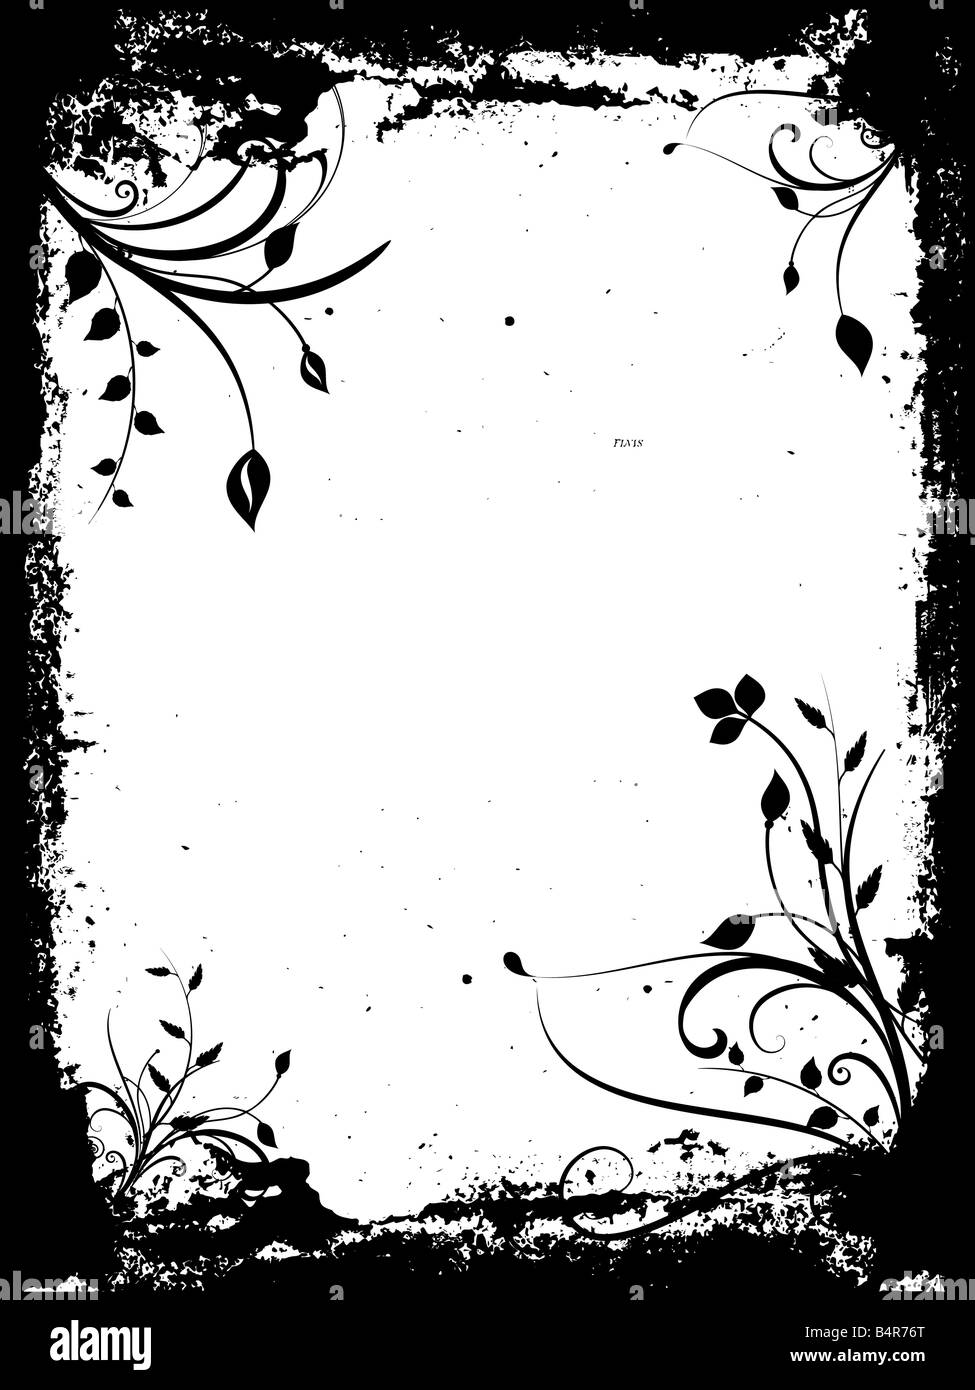 Abstract floral design on detailed grunge border Stock Photo